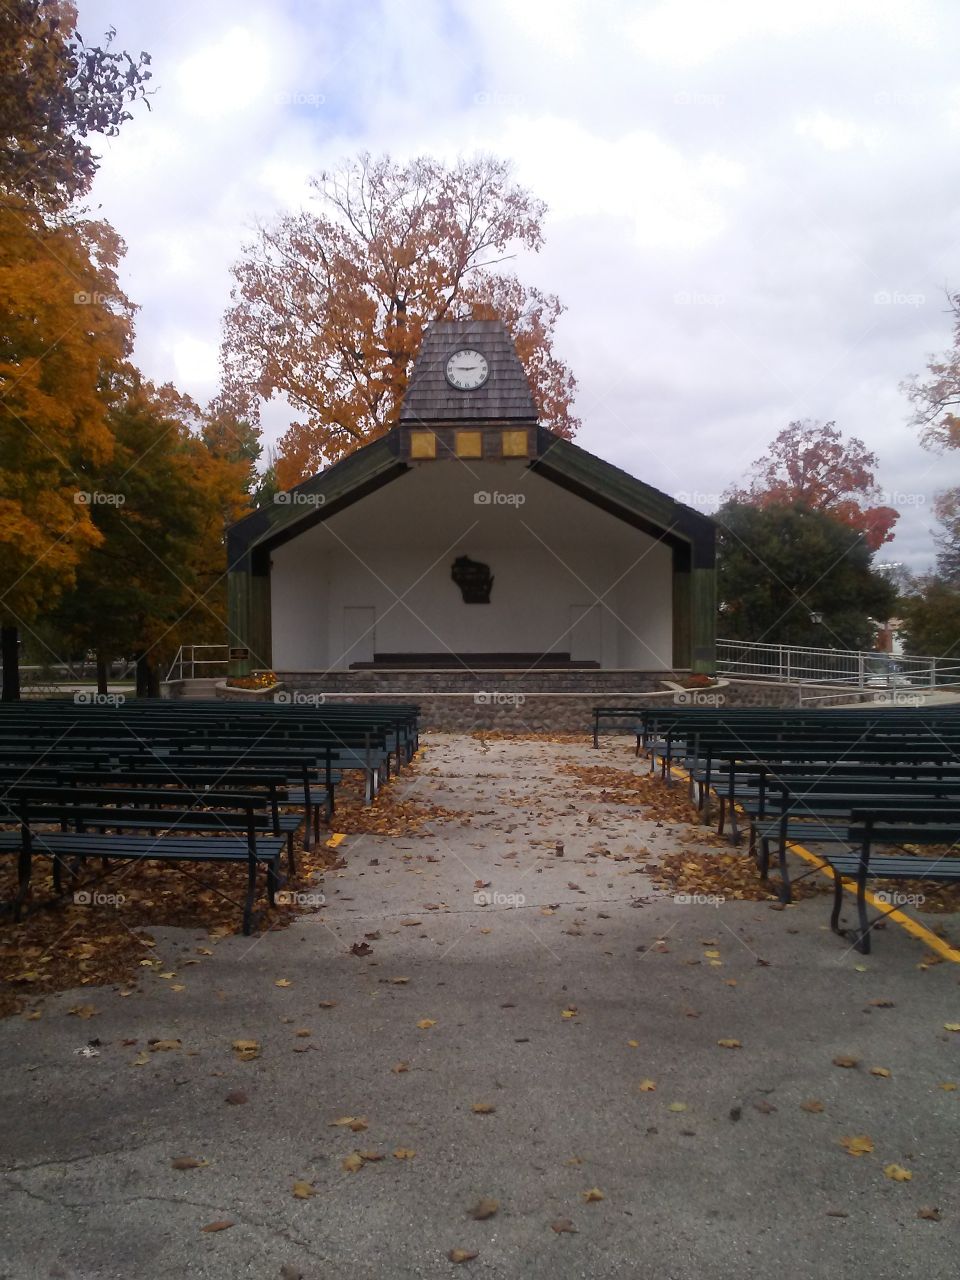 The newer bandstand at Plymouth City Park in Plymouth, Wisconsin. Built in 1985 .